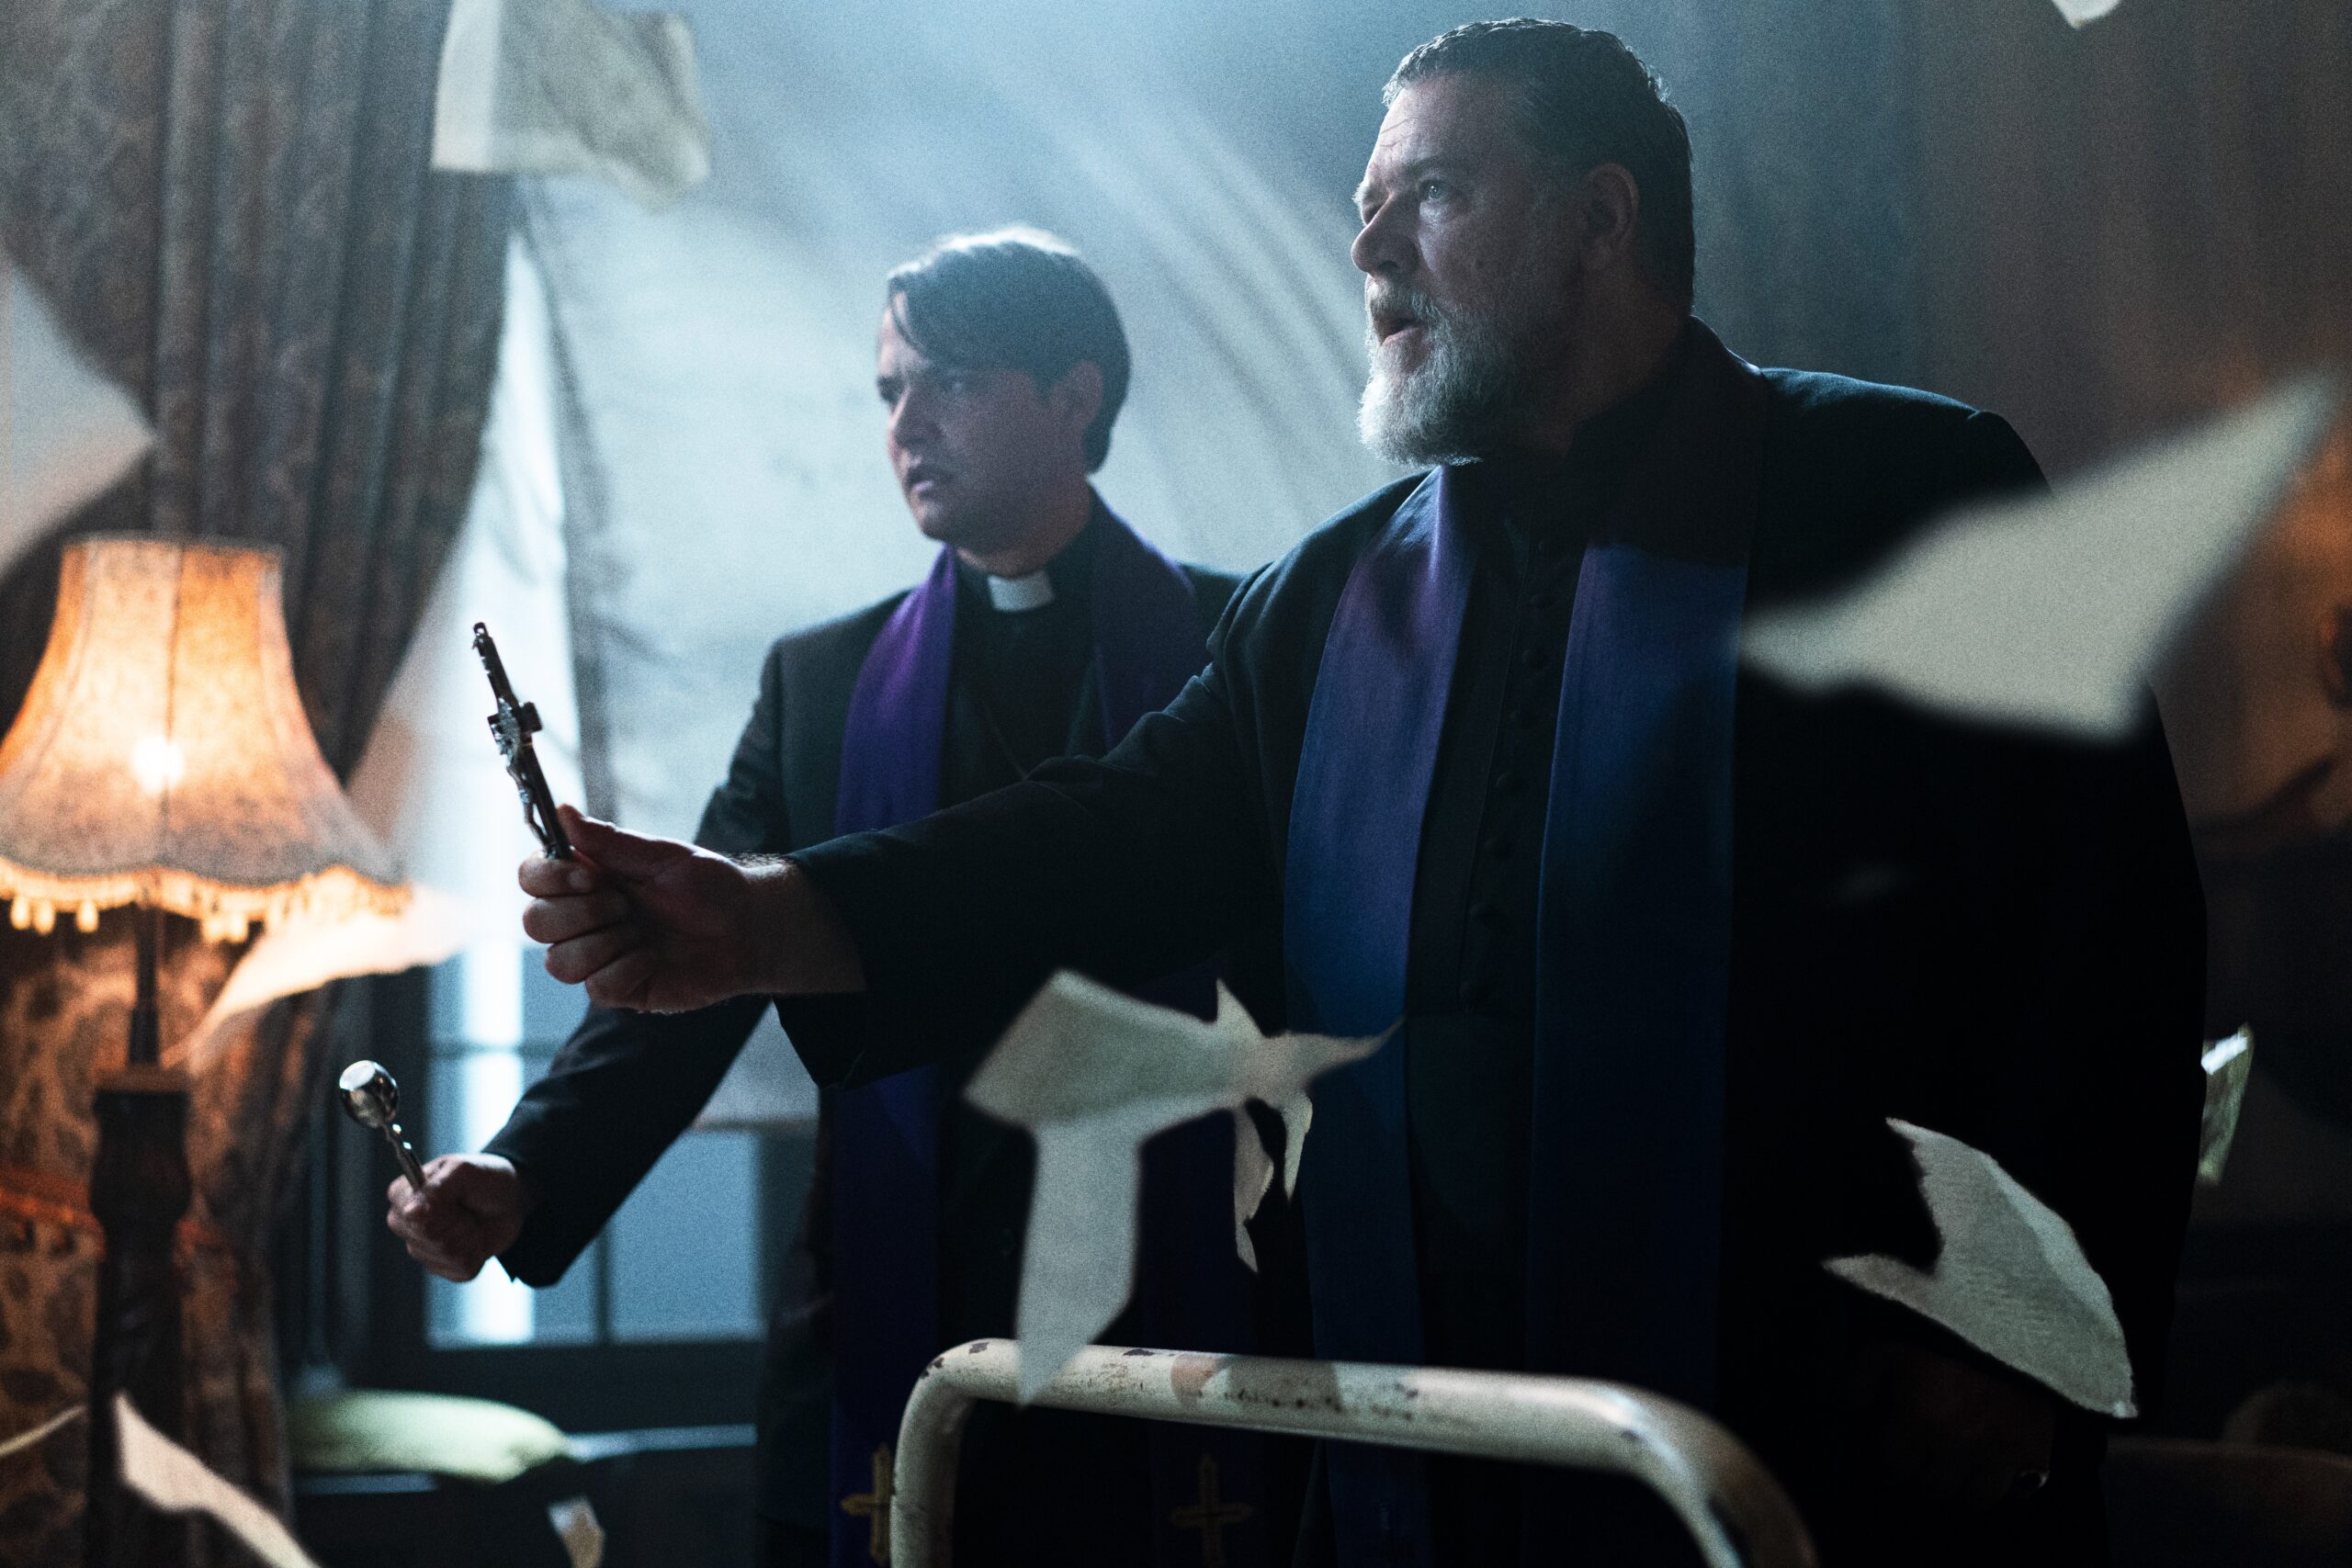 The Pope’s Exorcist | Daniel Zovatto on Russell Crowe, Exorcism and Looking Good as a Priest